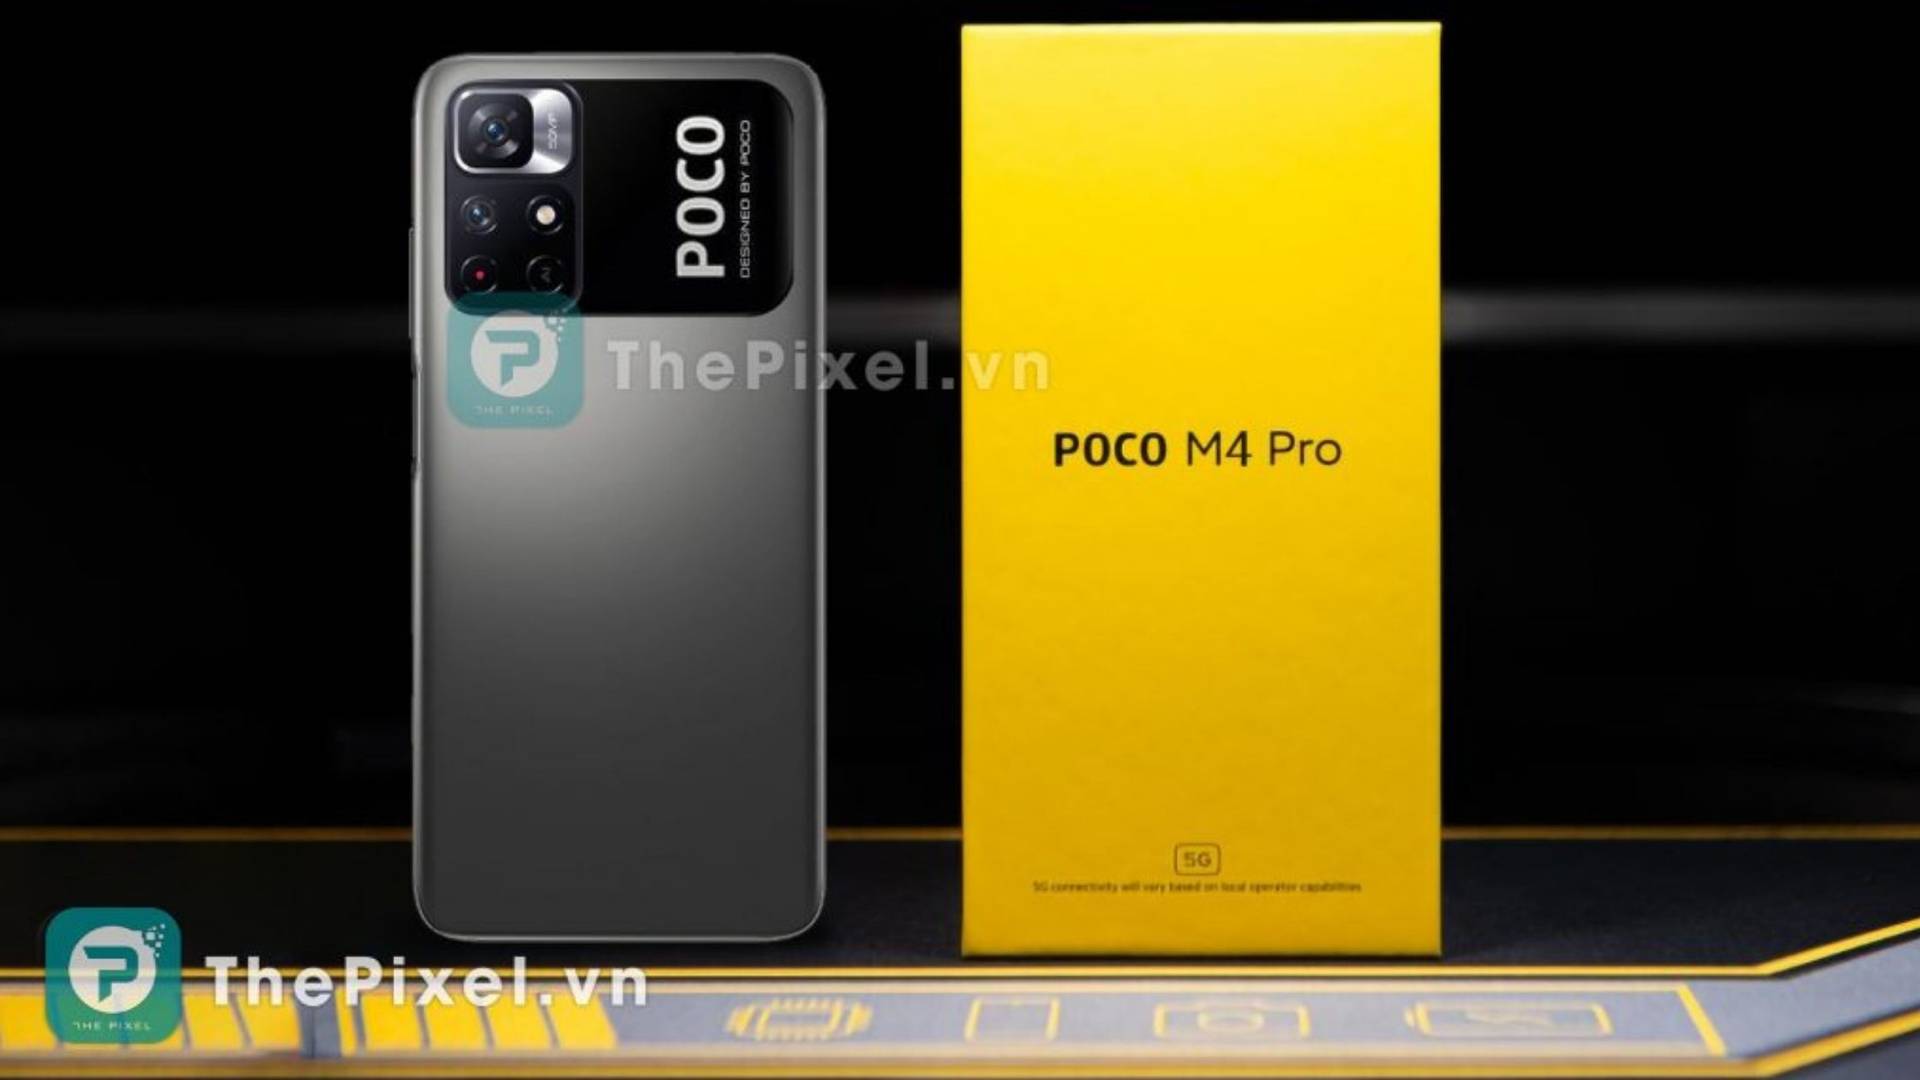 Poco M4 Pro 5G images suggest it will be a rebranded Redmi Note 11 5G